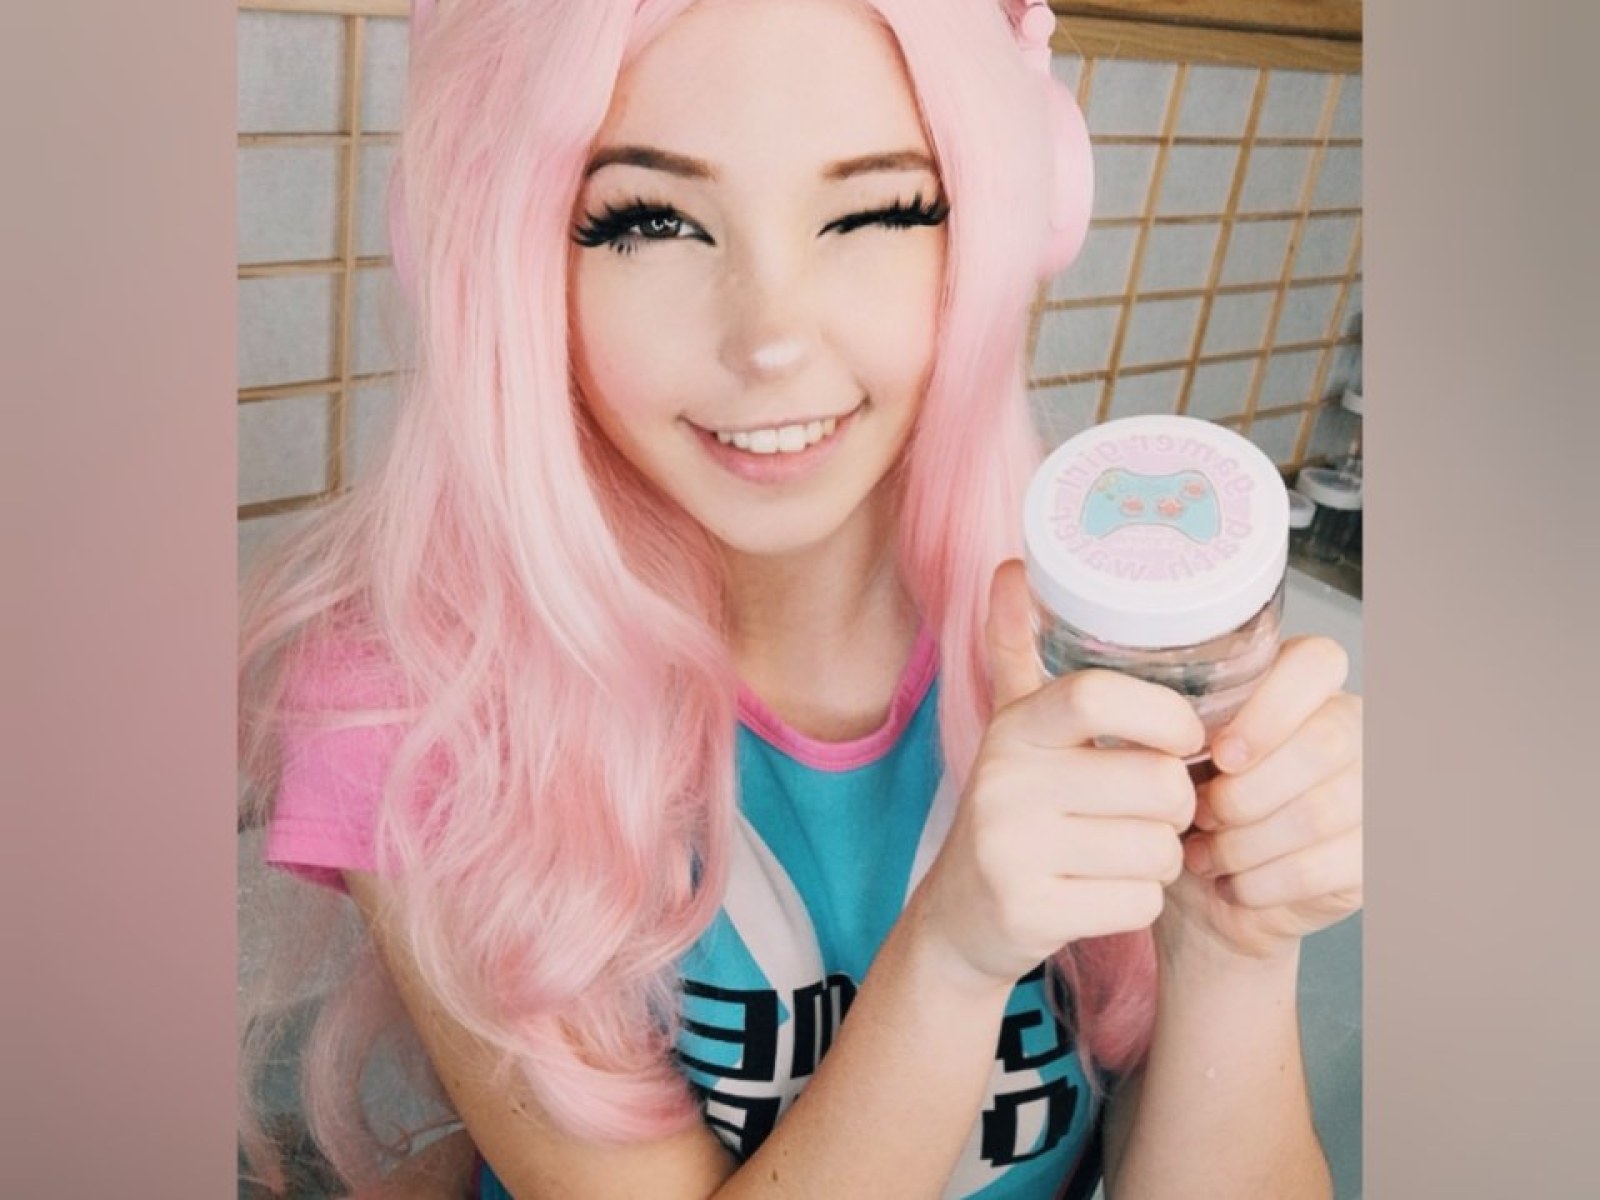 Fake belle delphine Actress That